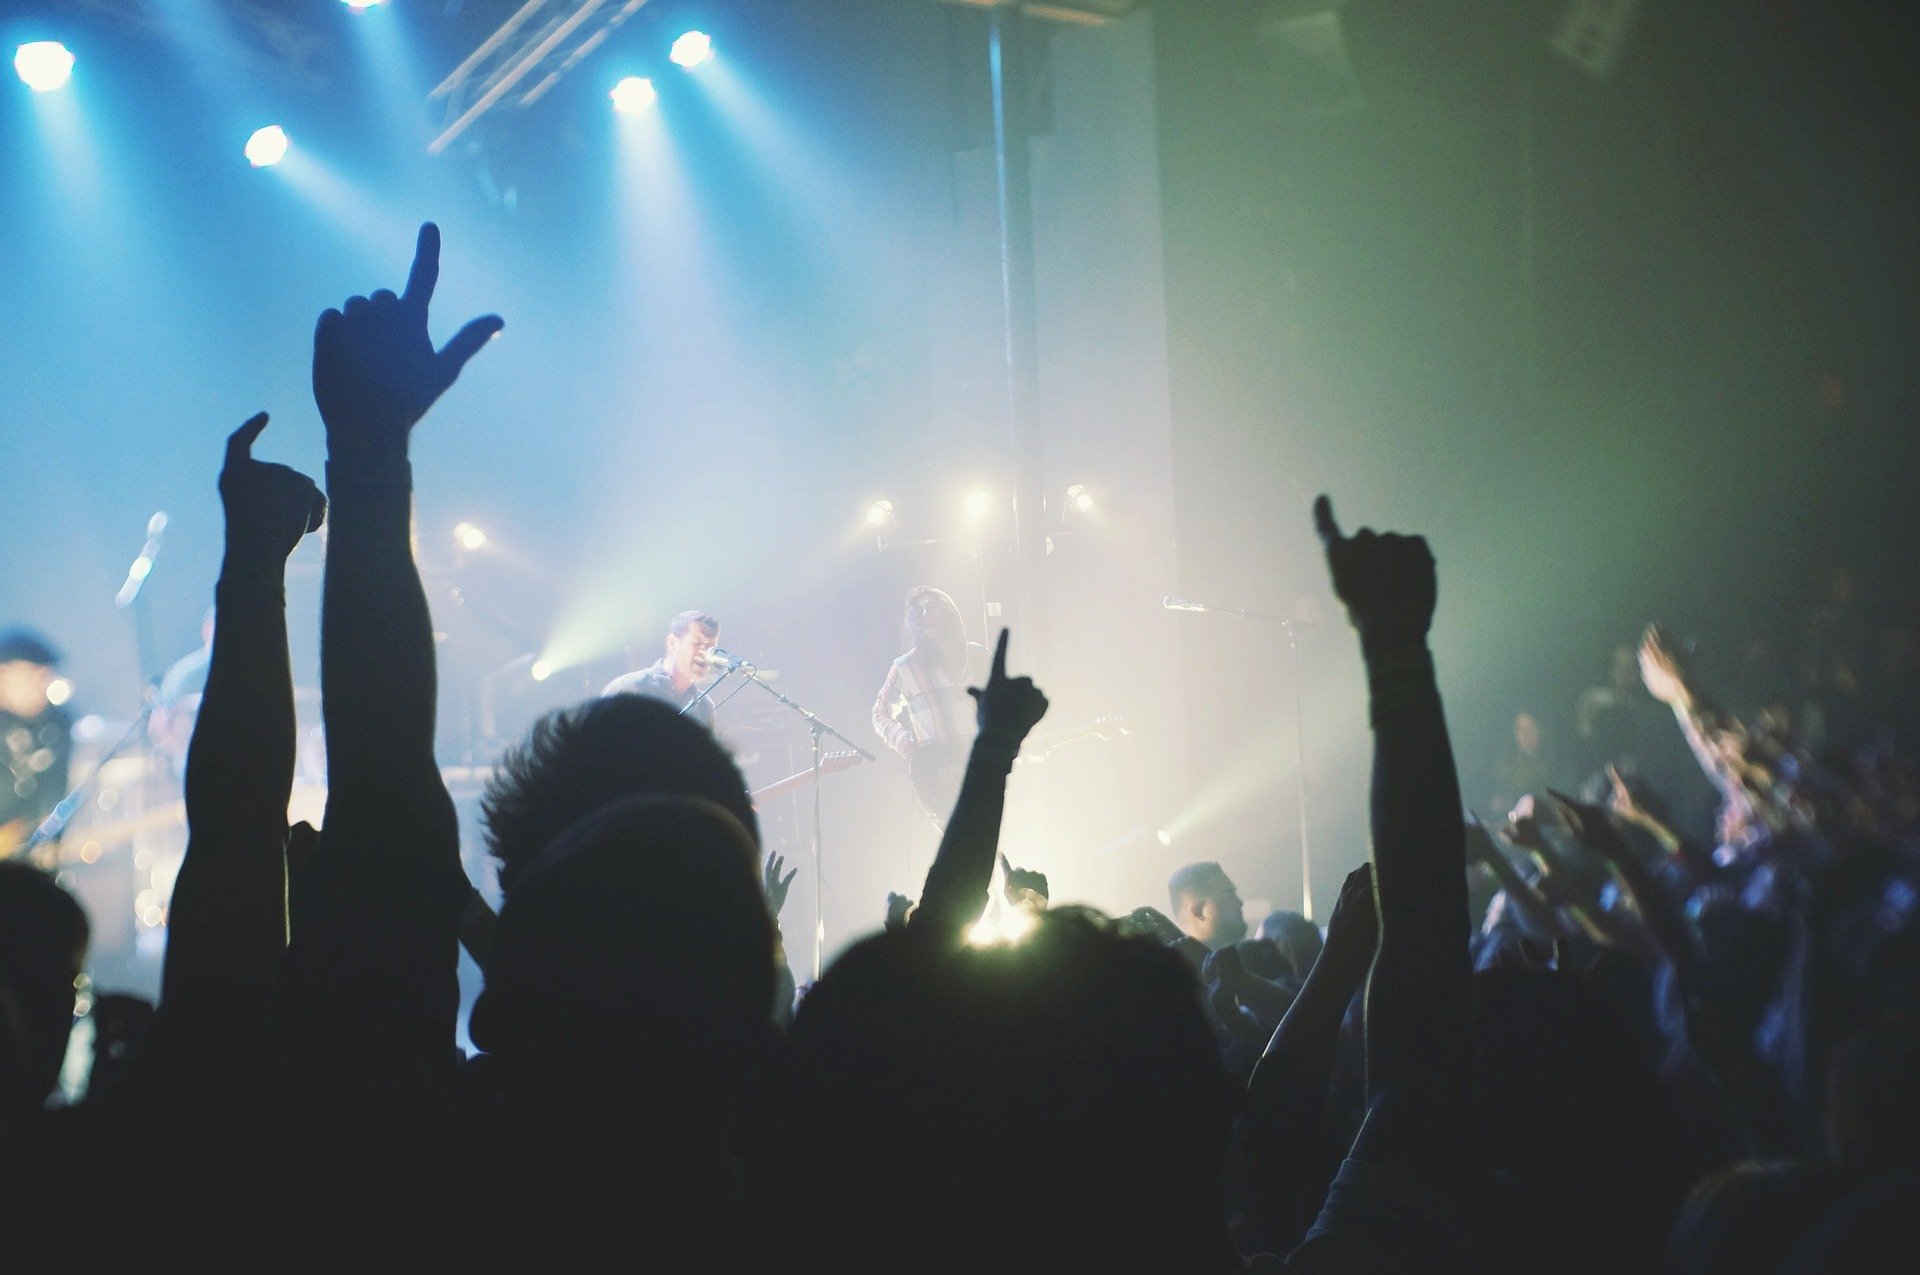 live concert loud noise induced hearing loss